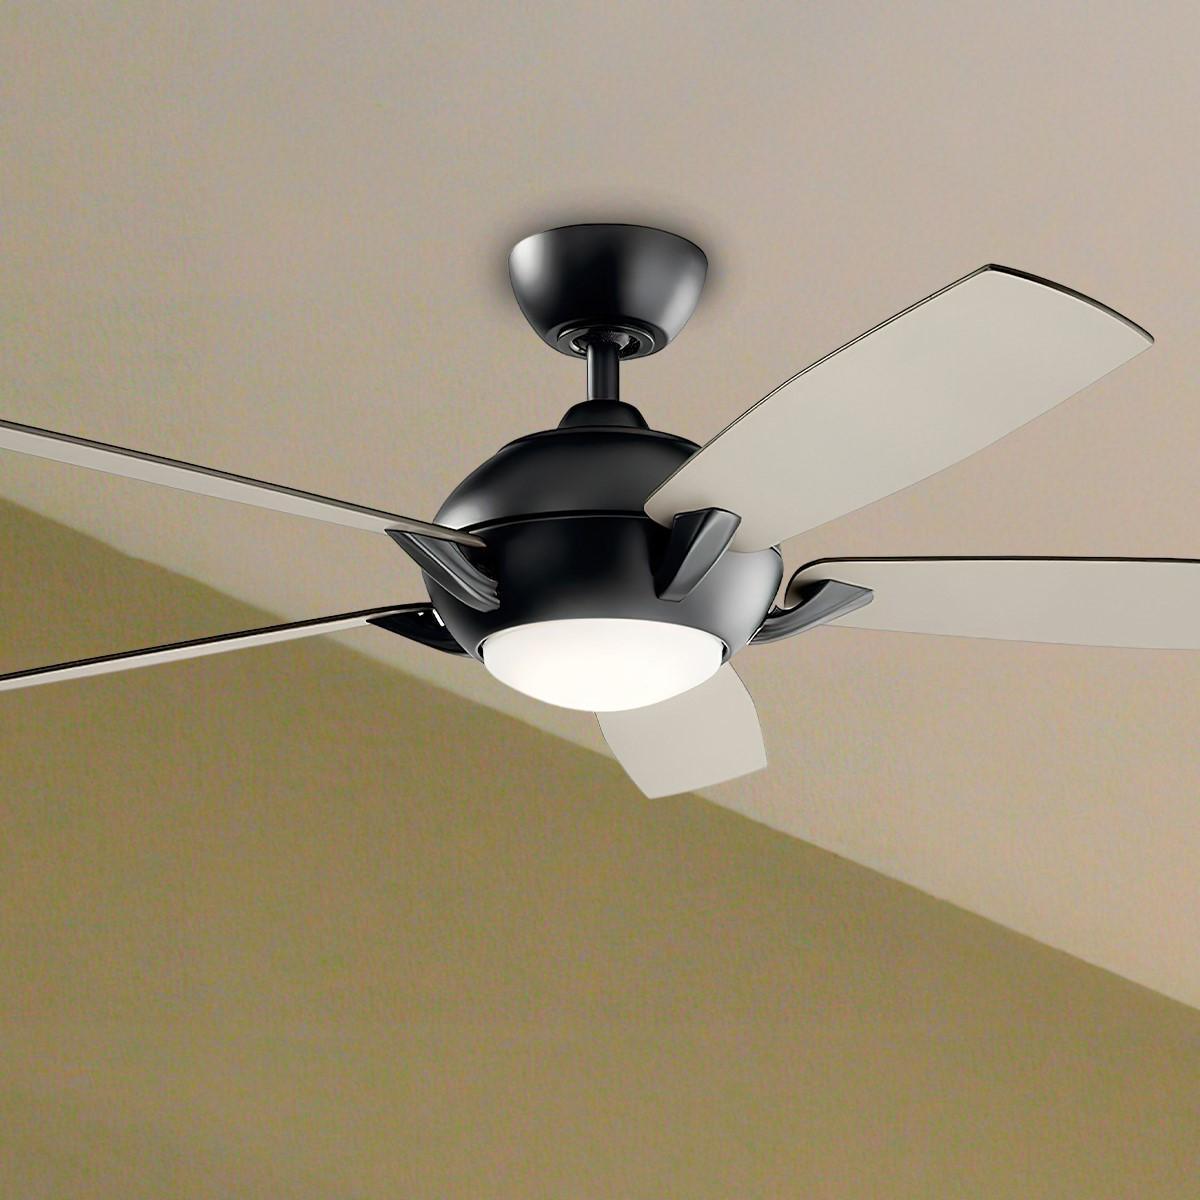 Geno 54 Inch Traditional Ceiling Fan With Light And Remote